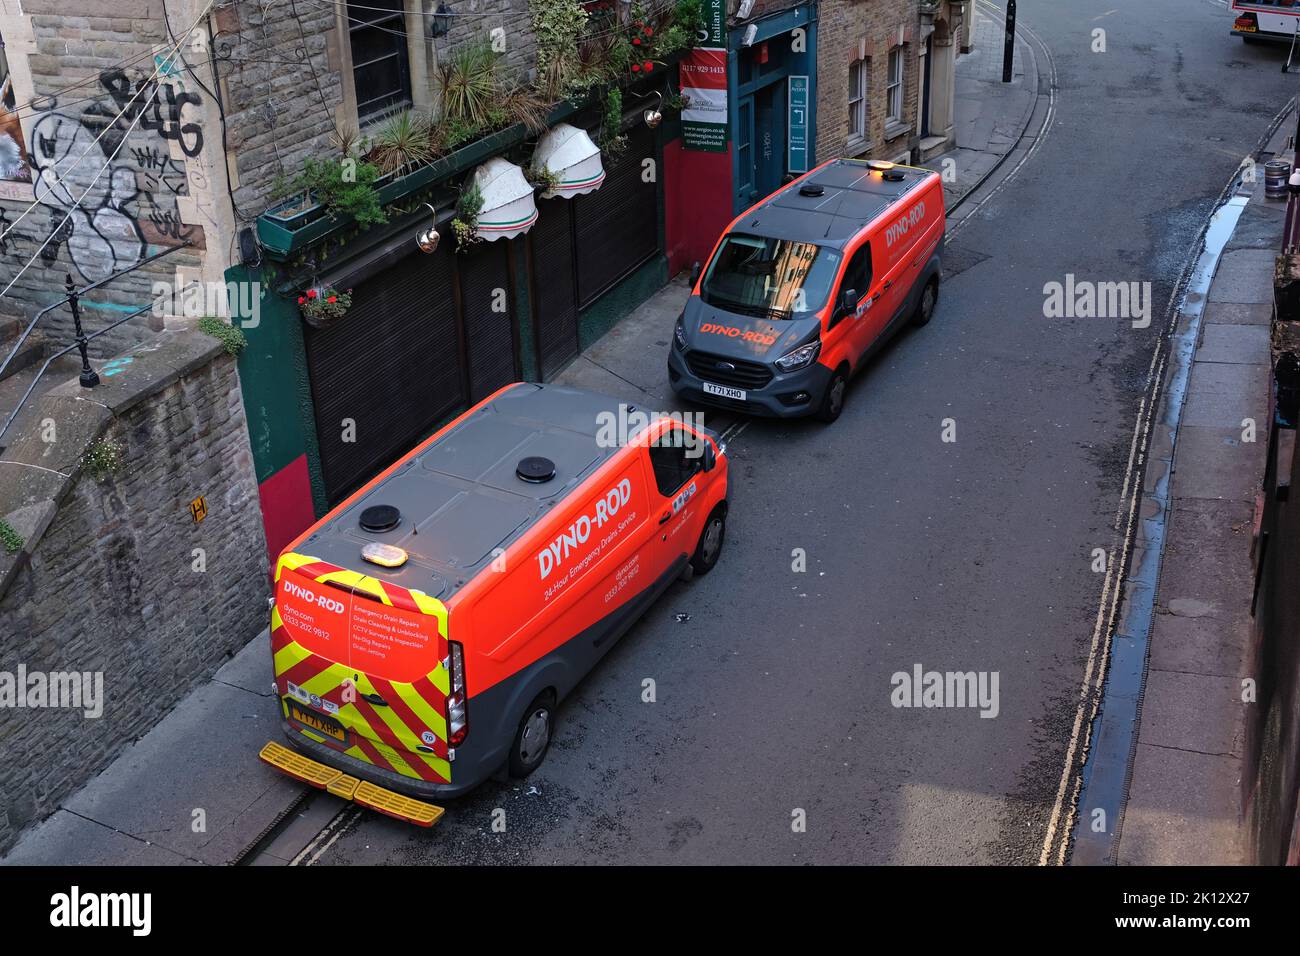 Two Dyno-Rod vans outside a building Stock Photo